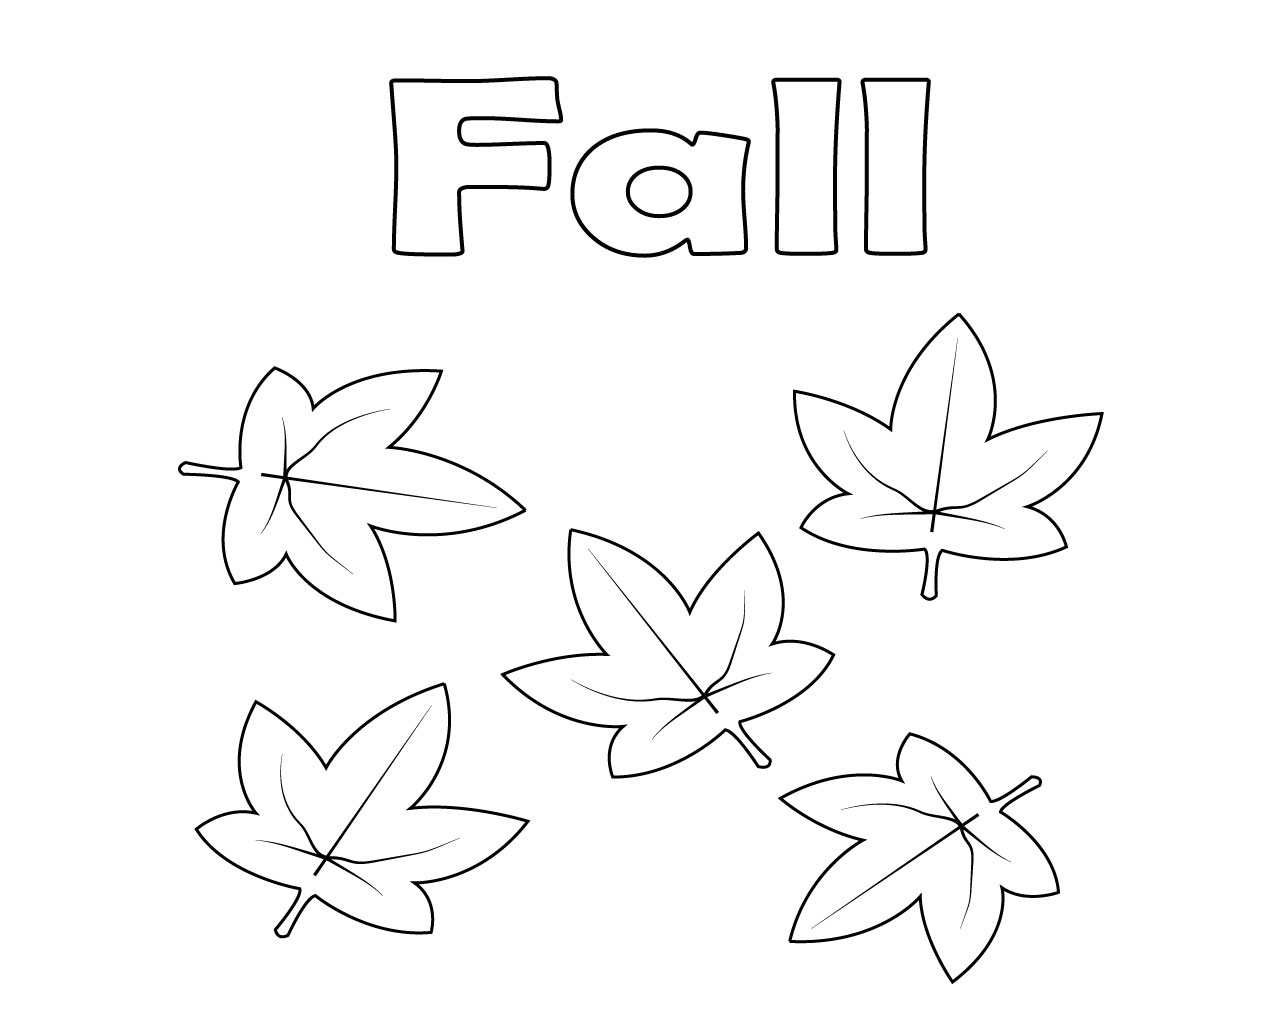 Best Maple Leaf Coloring Pages, red,Toronto,printable